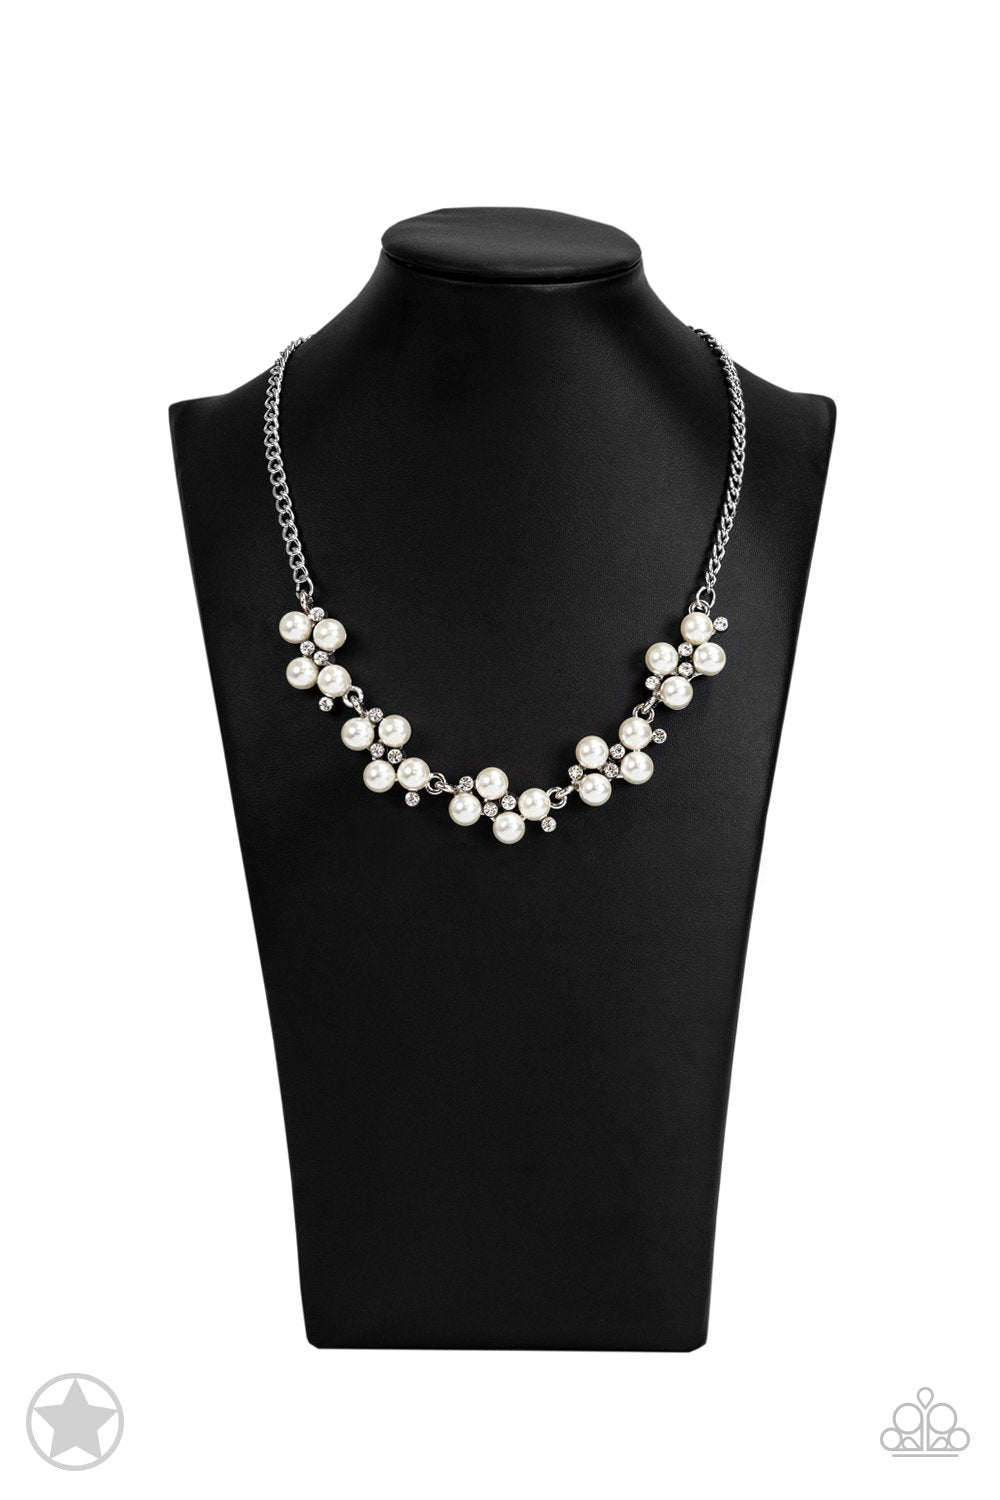 Love Story White Pearl Necklace and matching Earrings - Paparazzi Accessories- on bust -CarasShop.com - $5 Jewelry by Cara Jewels